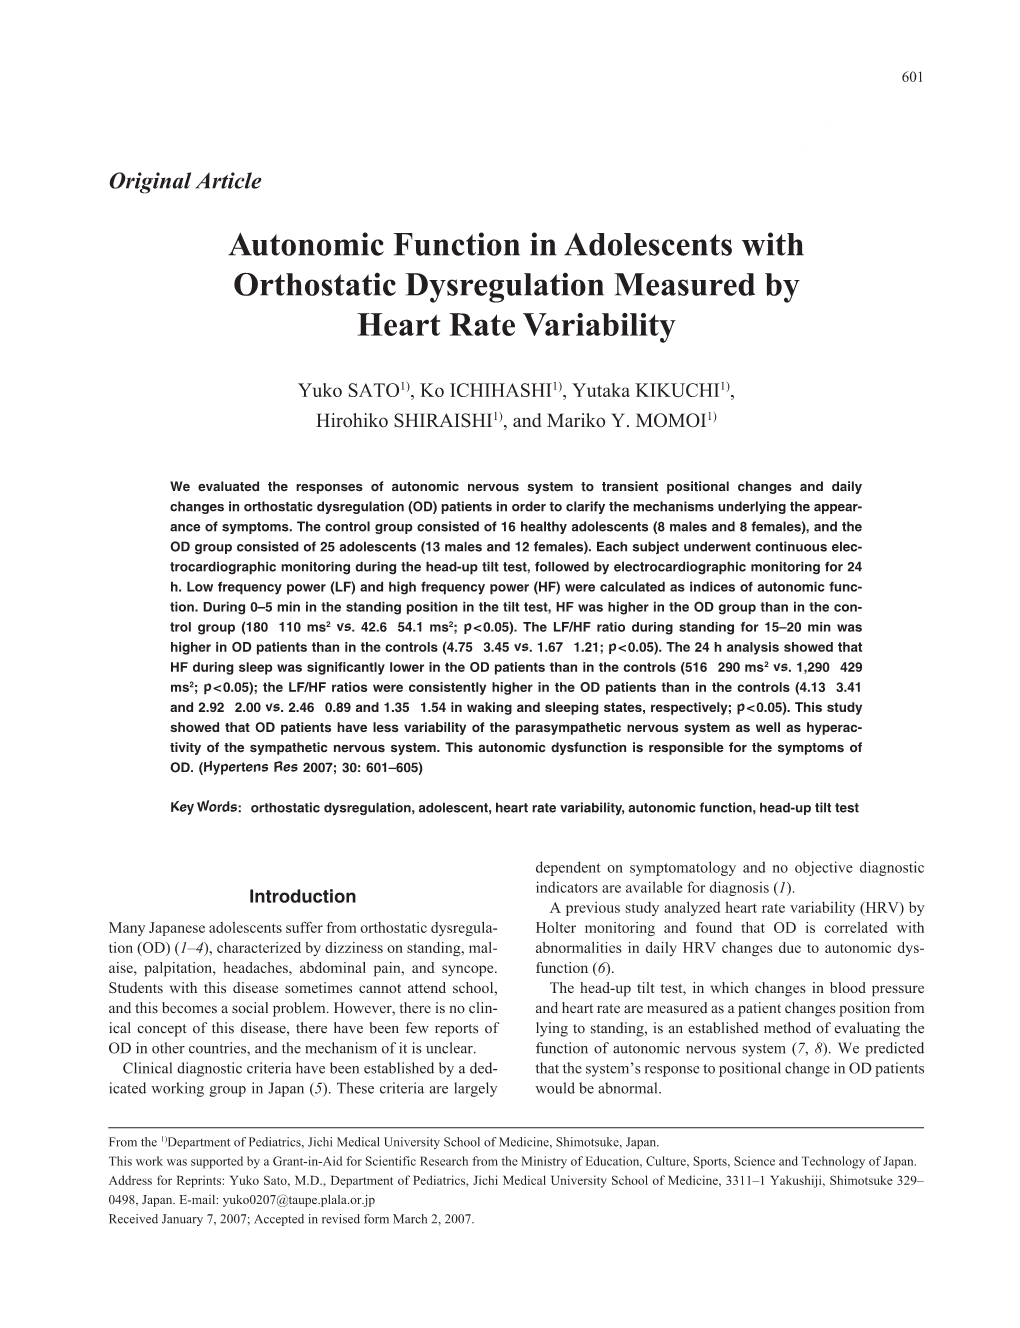 Autonomic Function in Adolescents with Orthostatic Dysregulation Measured by Heart Rate Variability